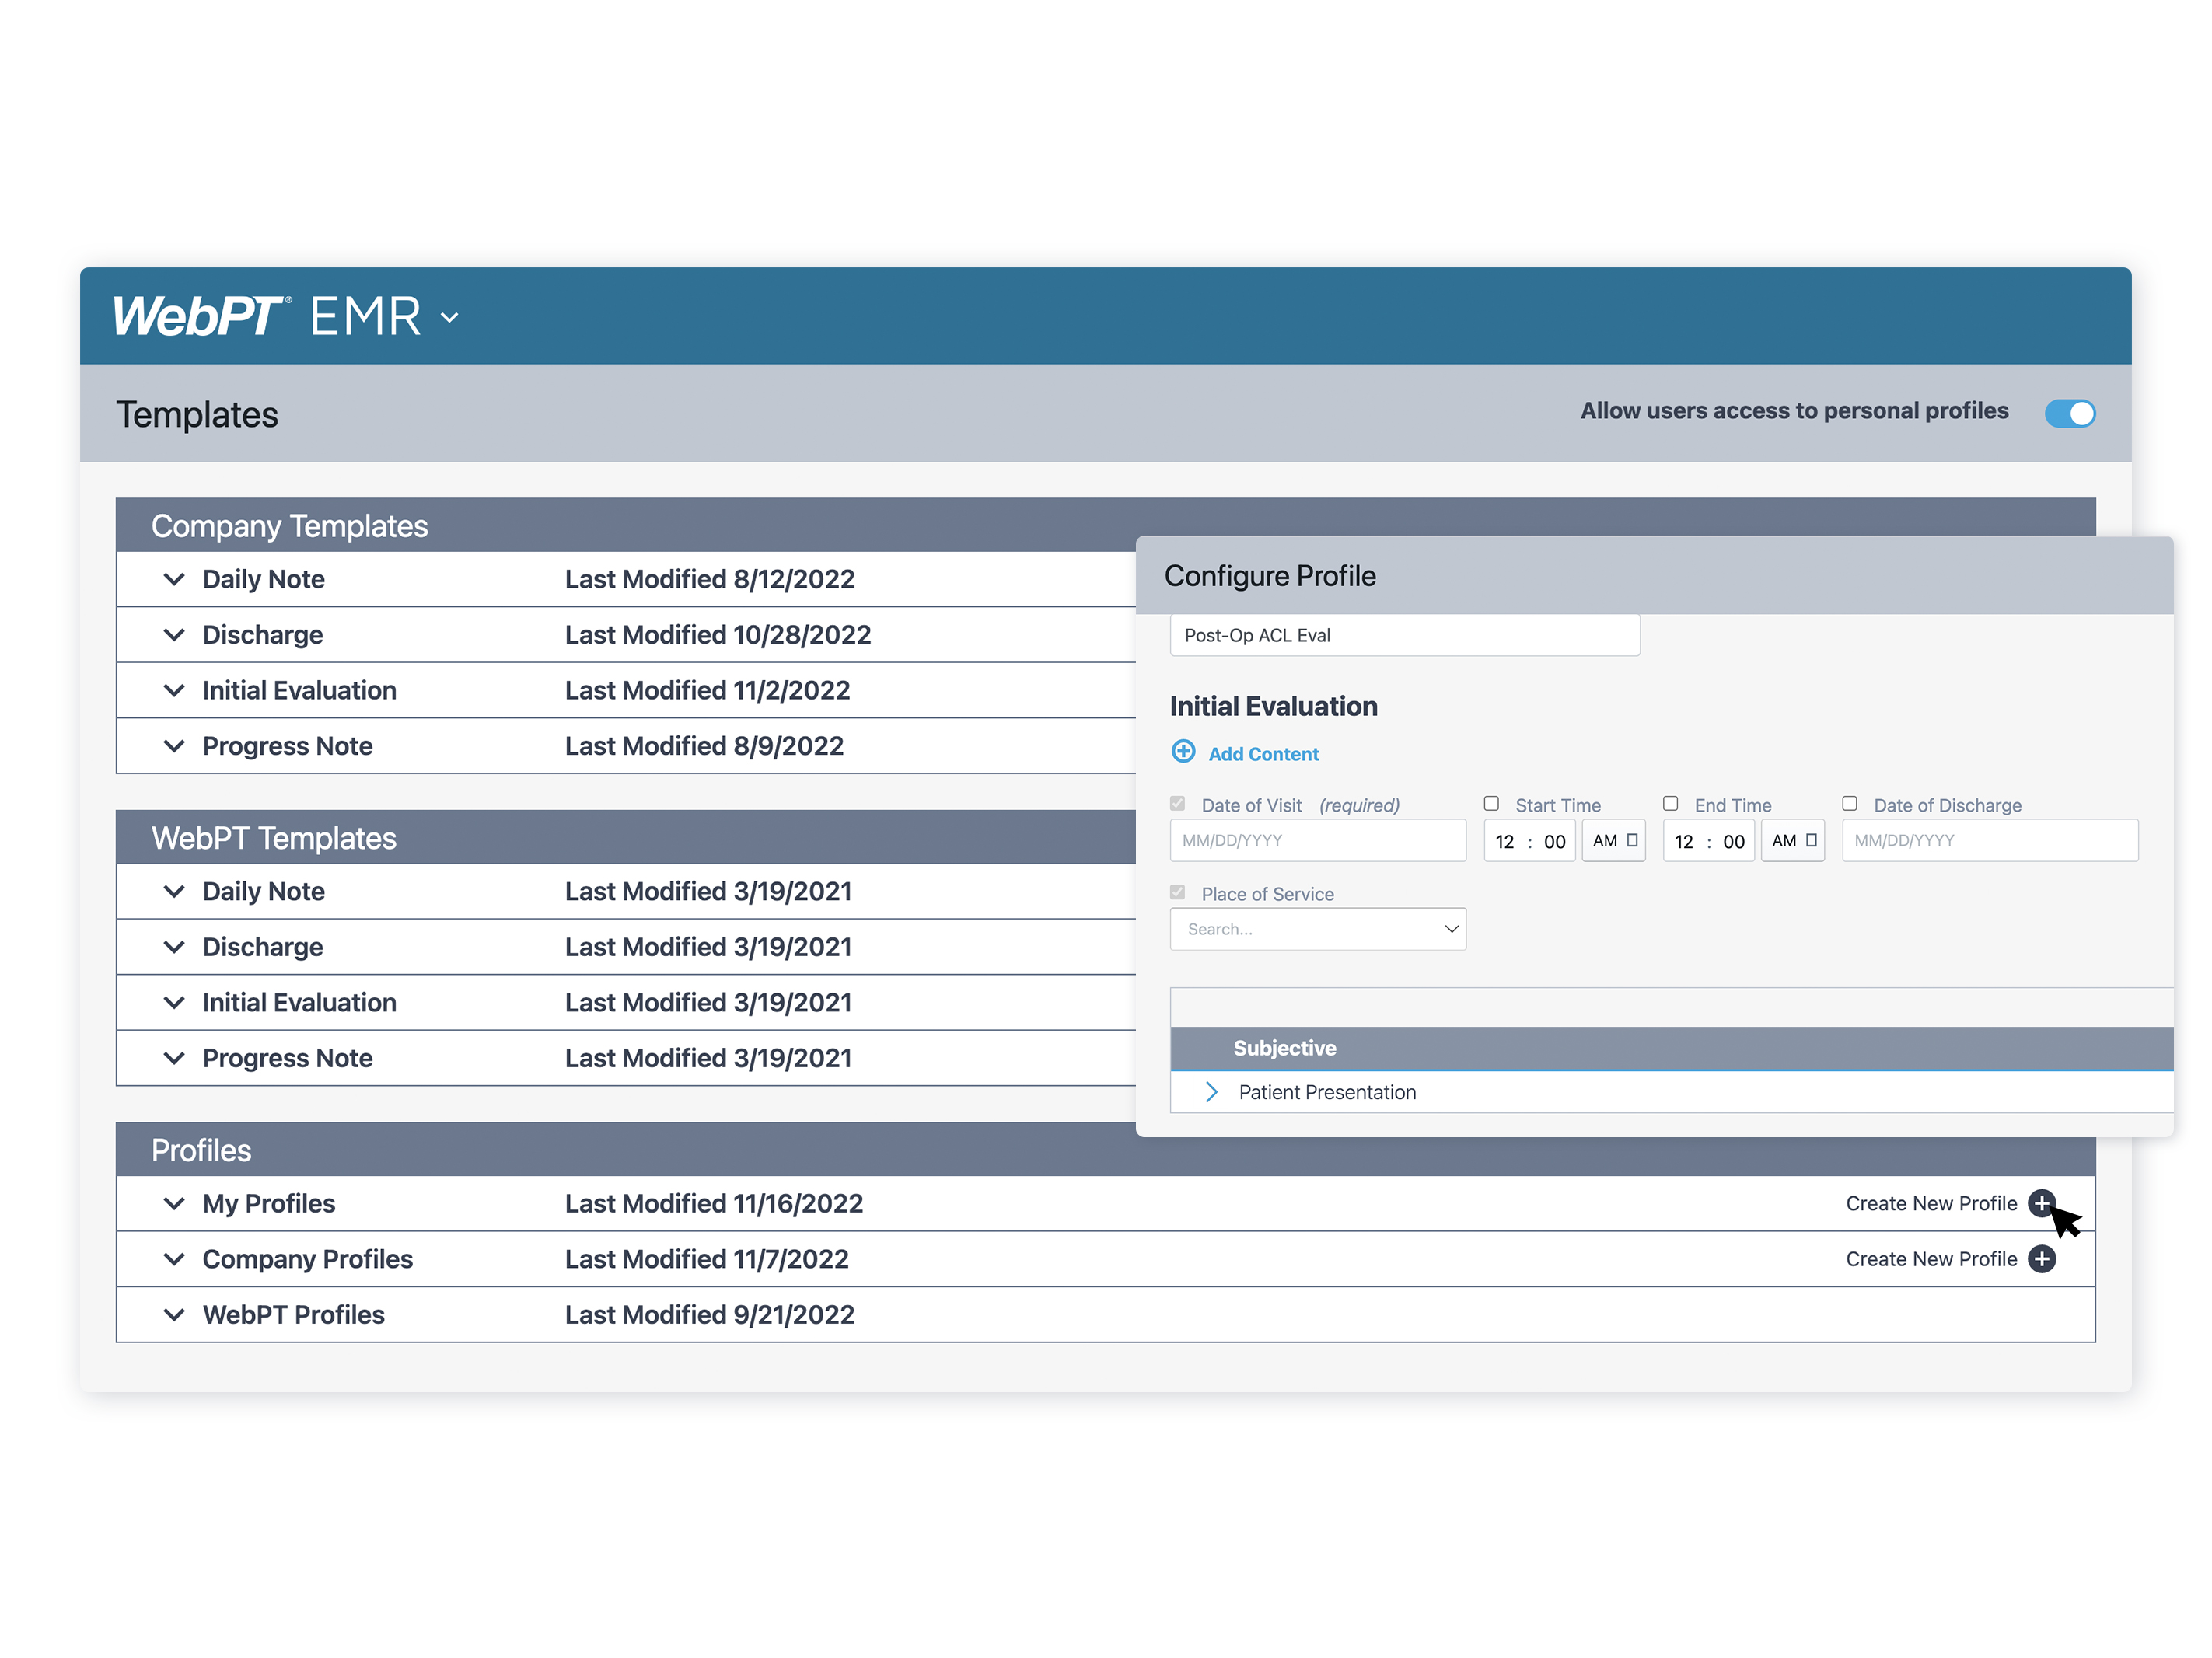 Document efficiently and defensibly with customizable templates, SOAP note format, and built-in compliance safeguards.